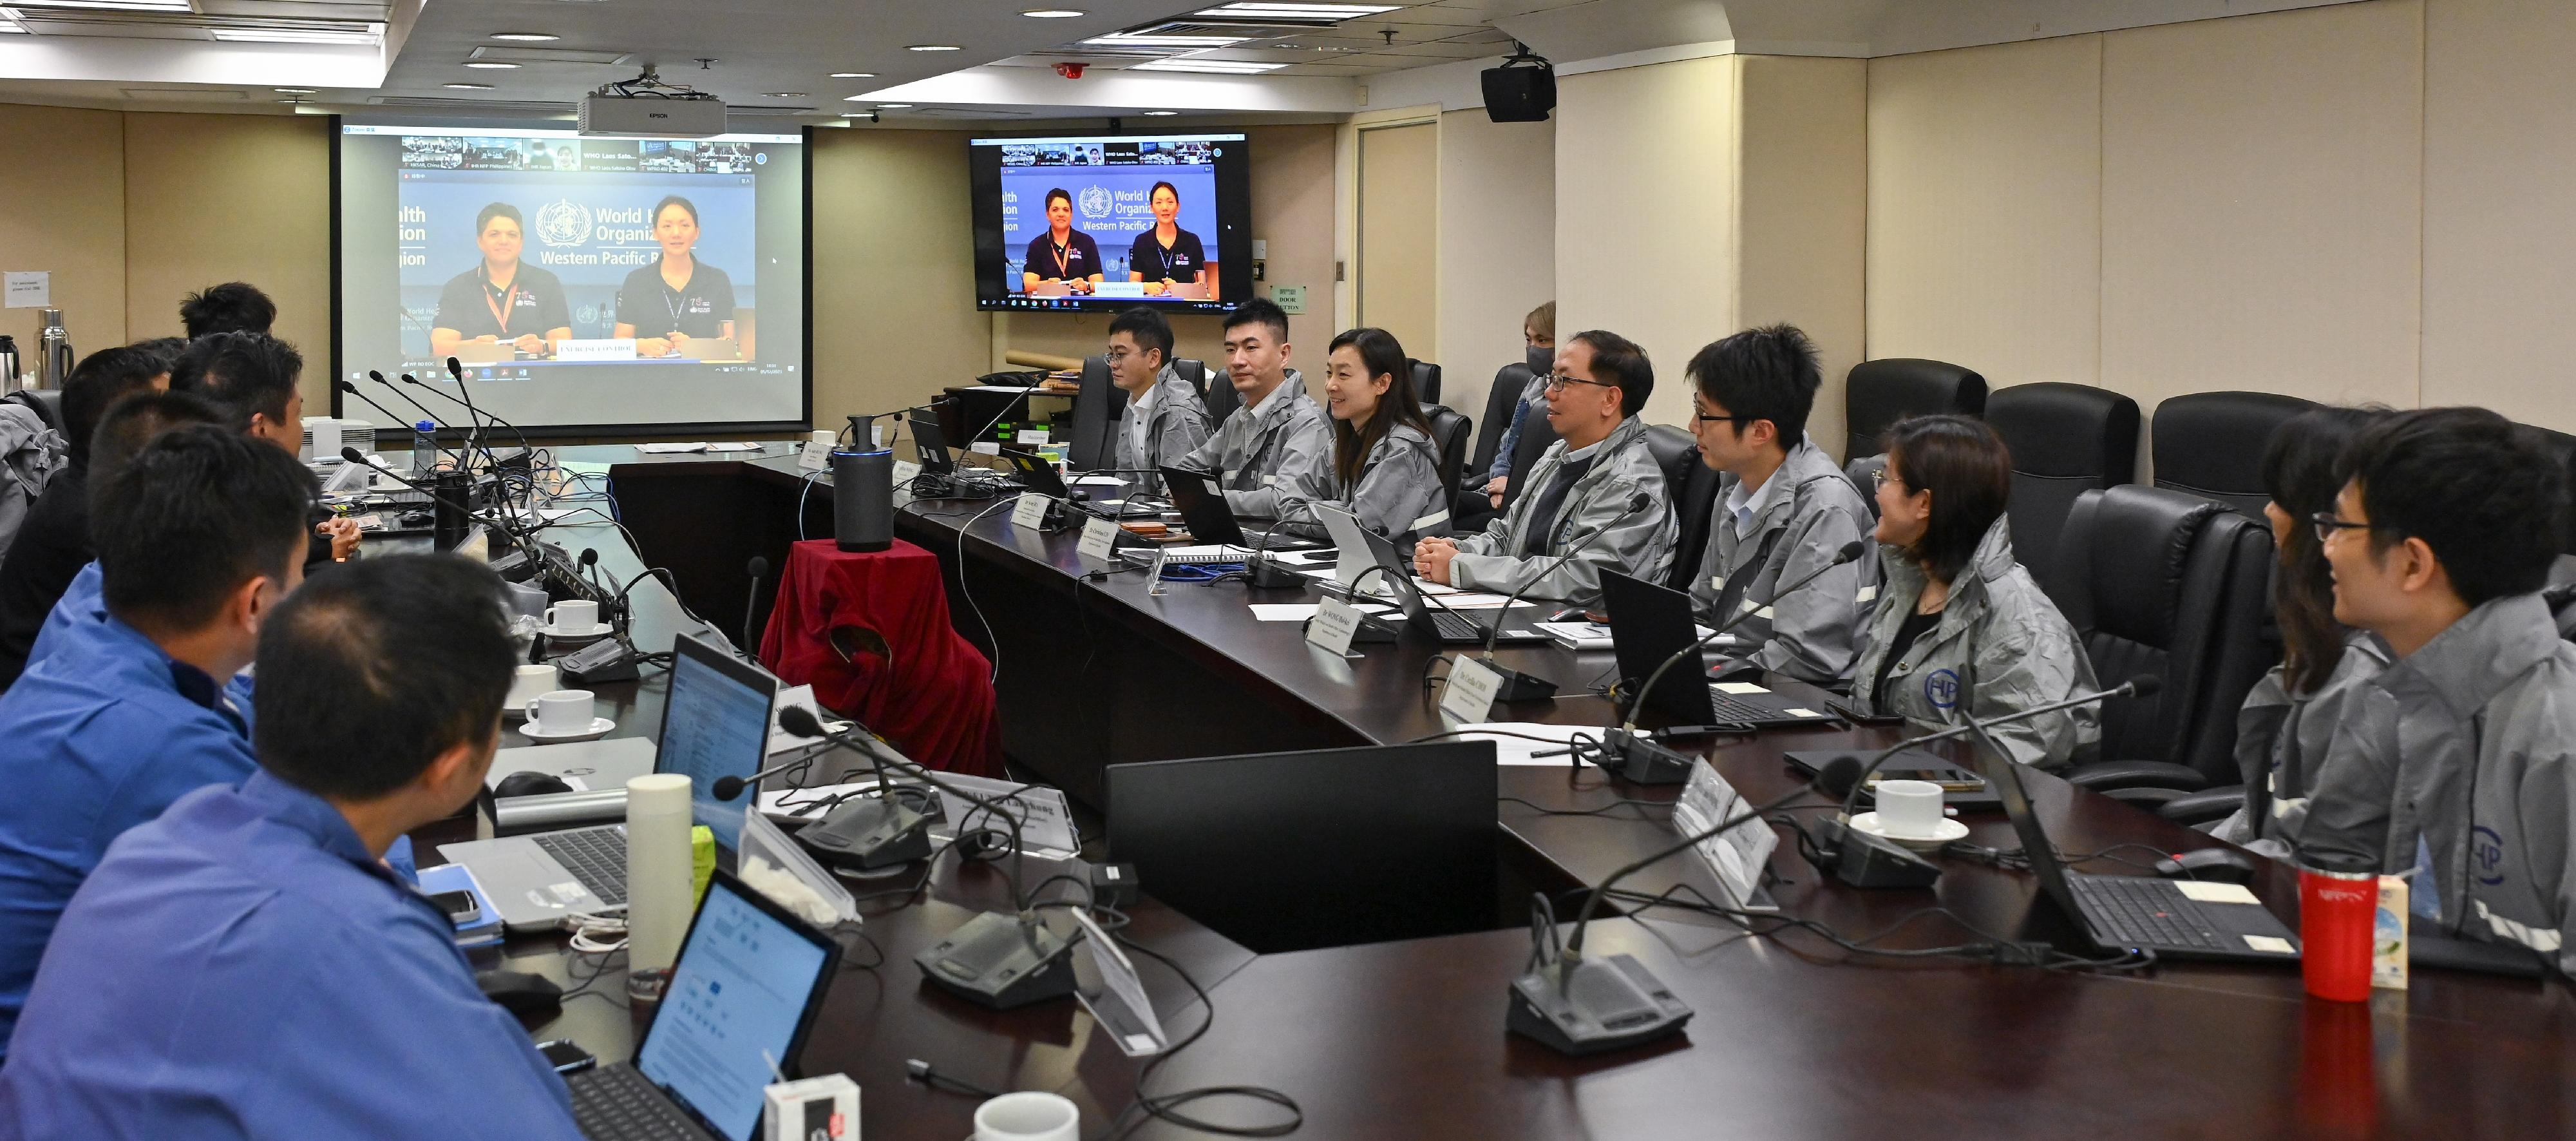 The Department of Health, together with the Security Bureau, the Hong Kong Police Force, the Fire Services Department and the Hospital Authority today (December 5) participated in the annual International Health Regulations Exercise Crystal organised by the World Health Organization's Regional Office for the Western Pacific (WPRO) to enhance public health emergency preparedness and response systems. Photo shows a debriefing with experience sharing by participants led by the WPRO.